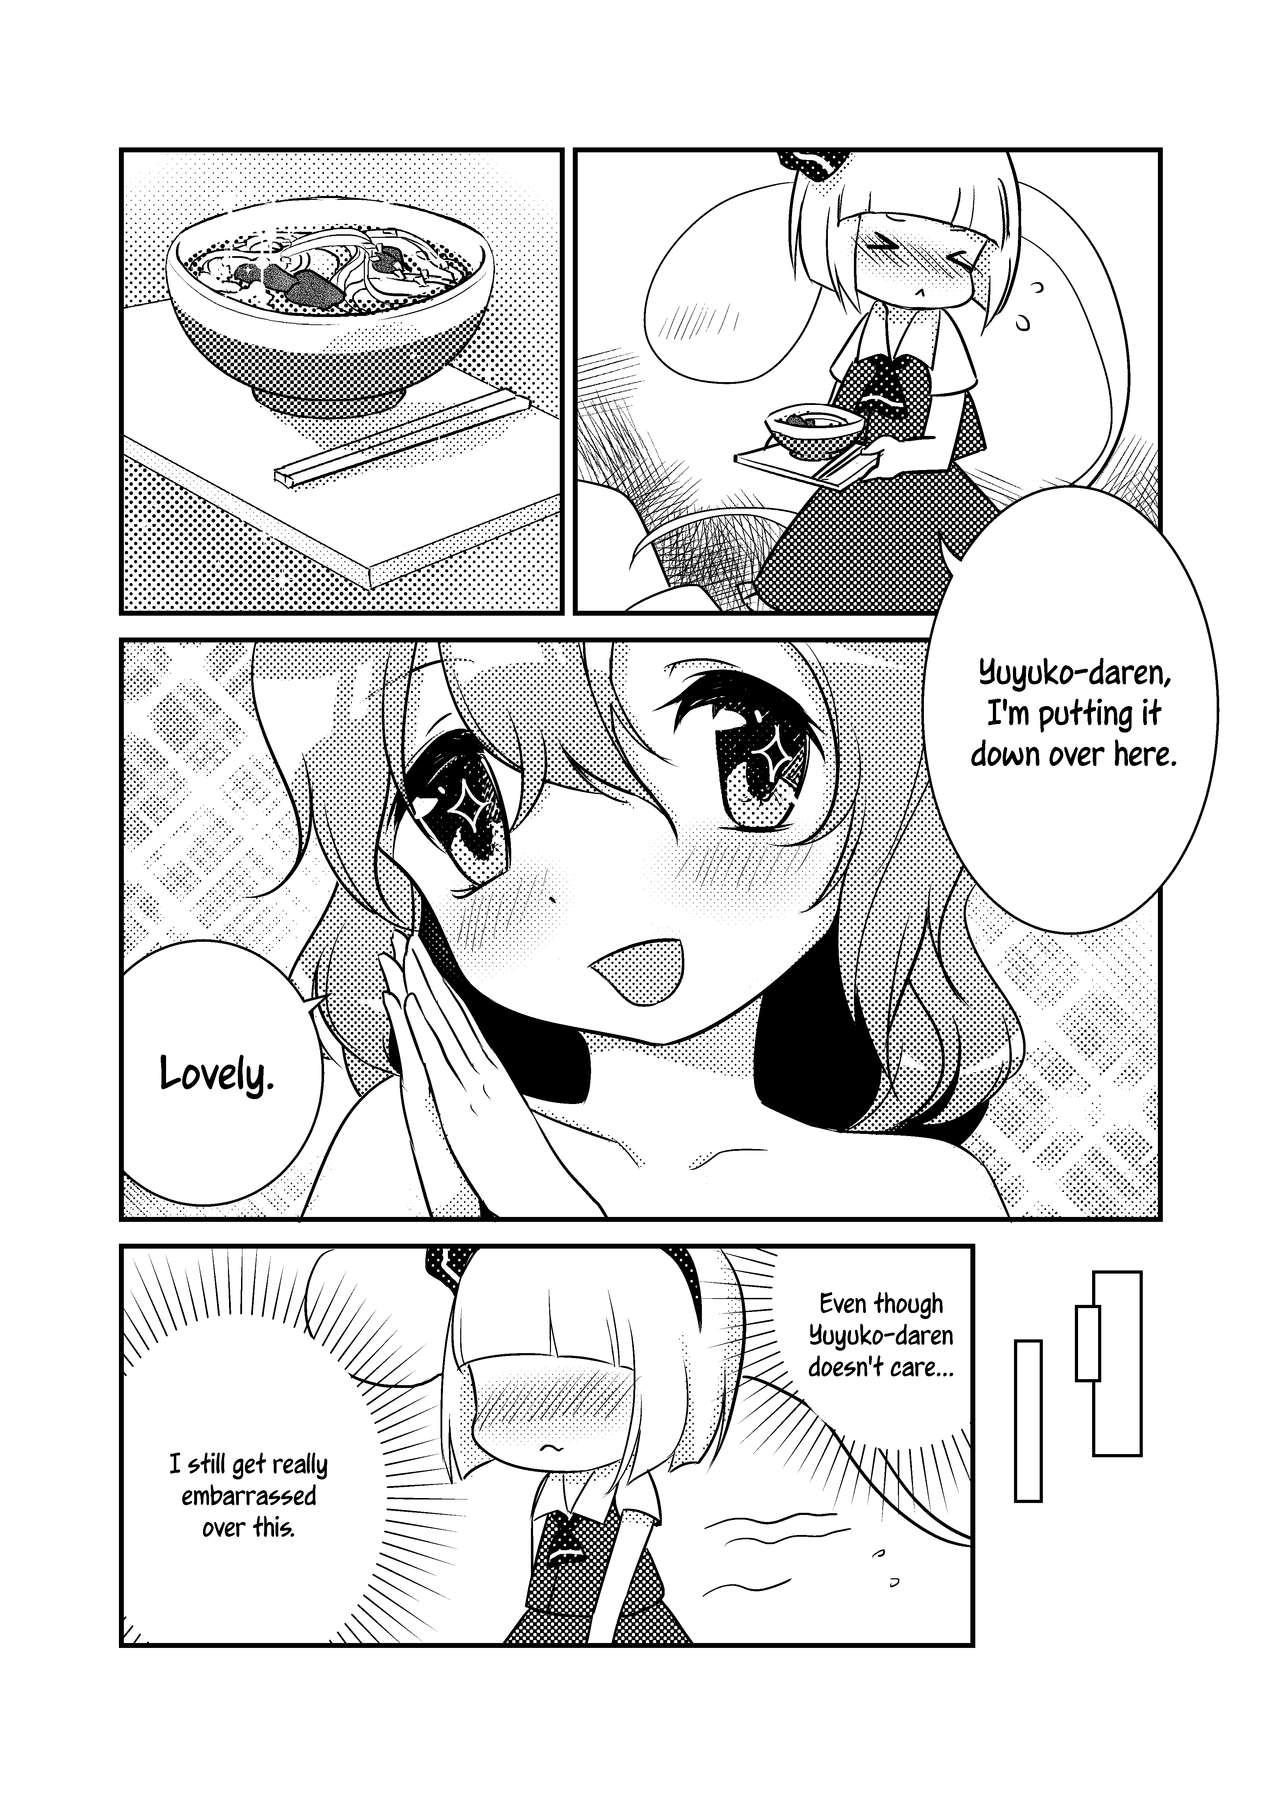 Dyke ????一起泡温泉吧！ | ????Let's Soak in the Hot Spring! - Touhou project Abuse - Page 4